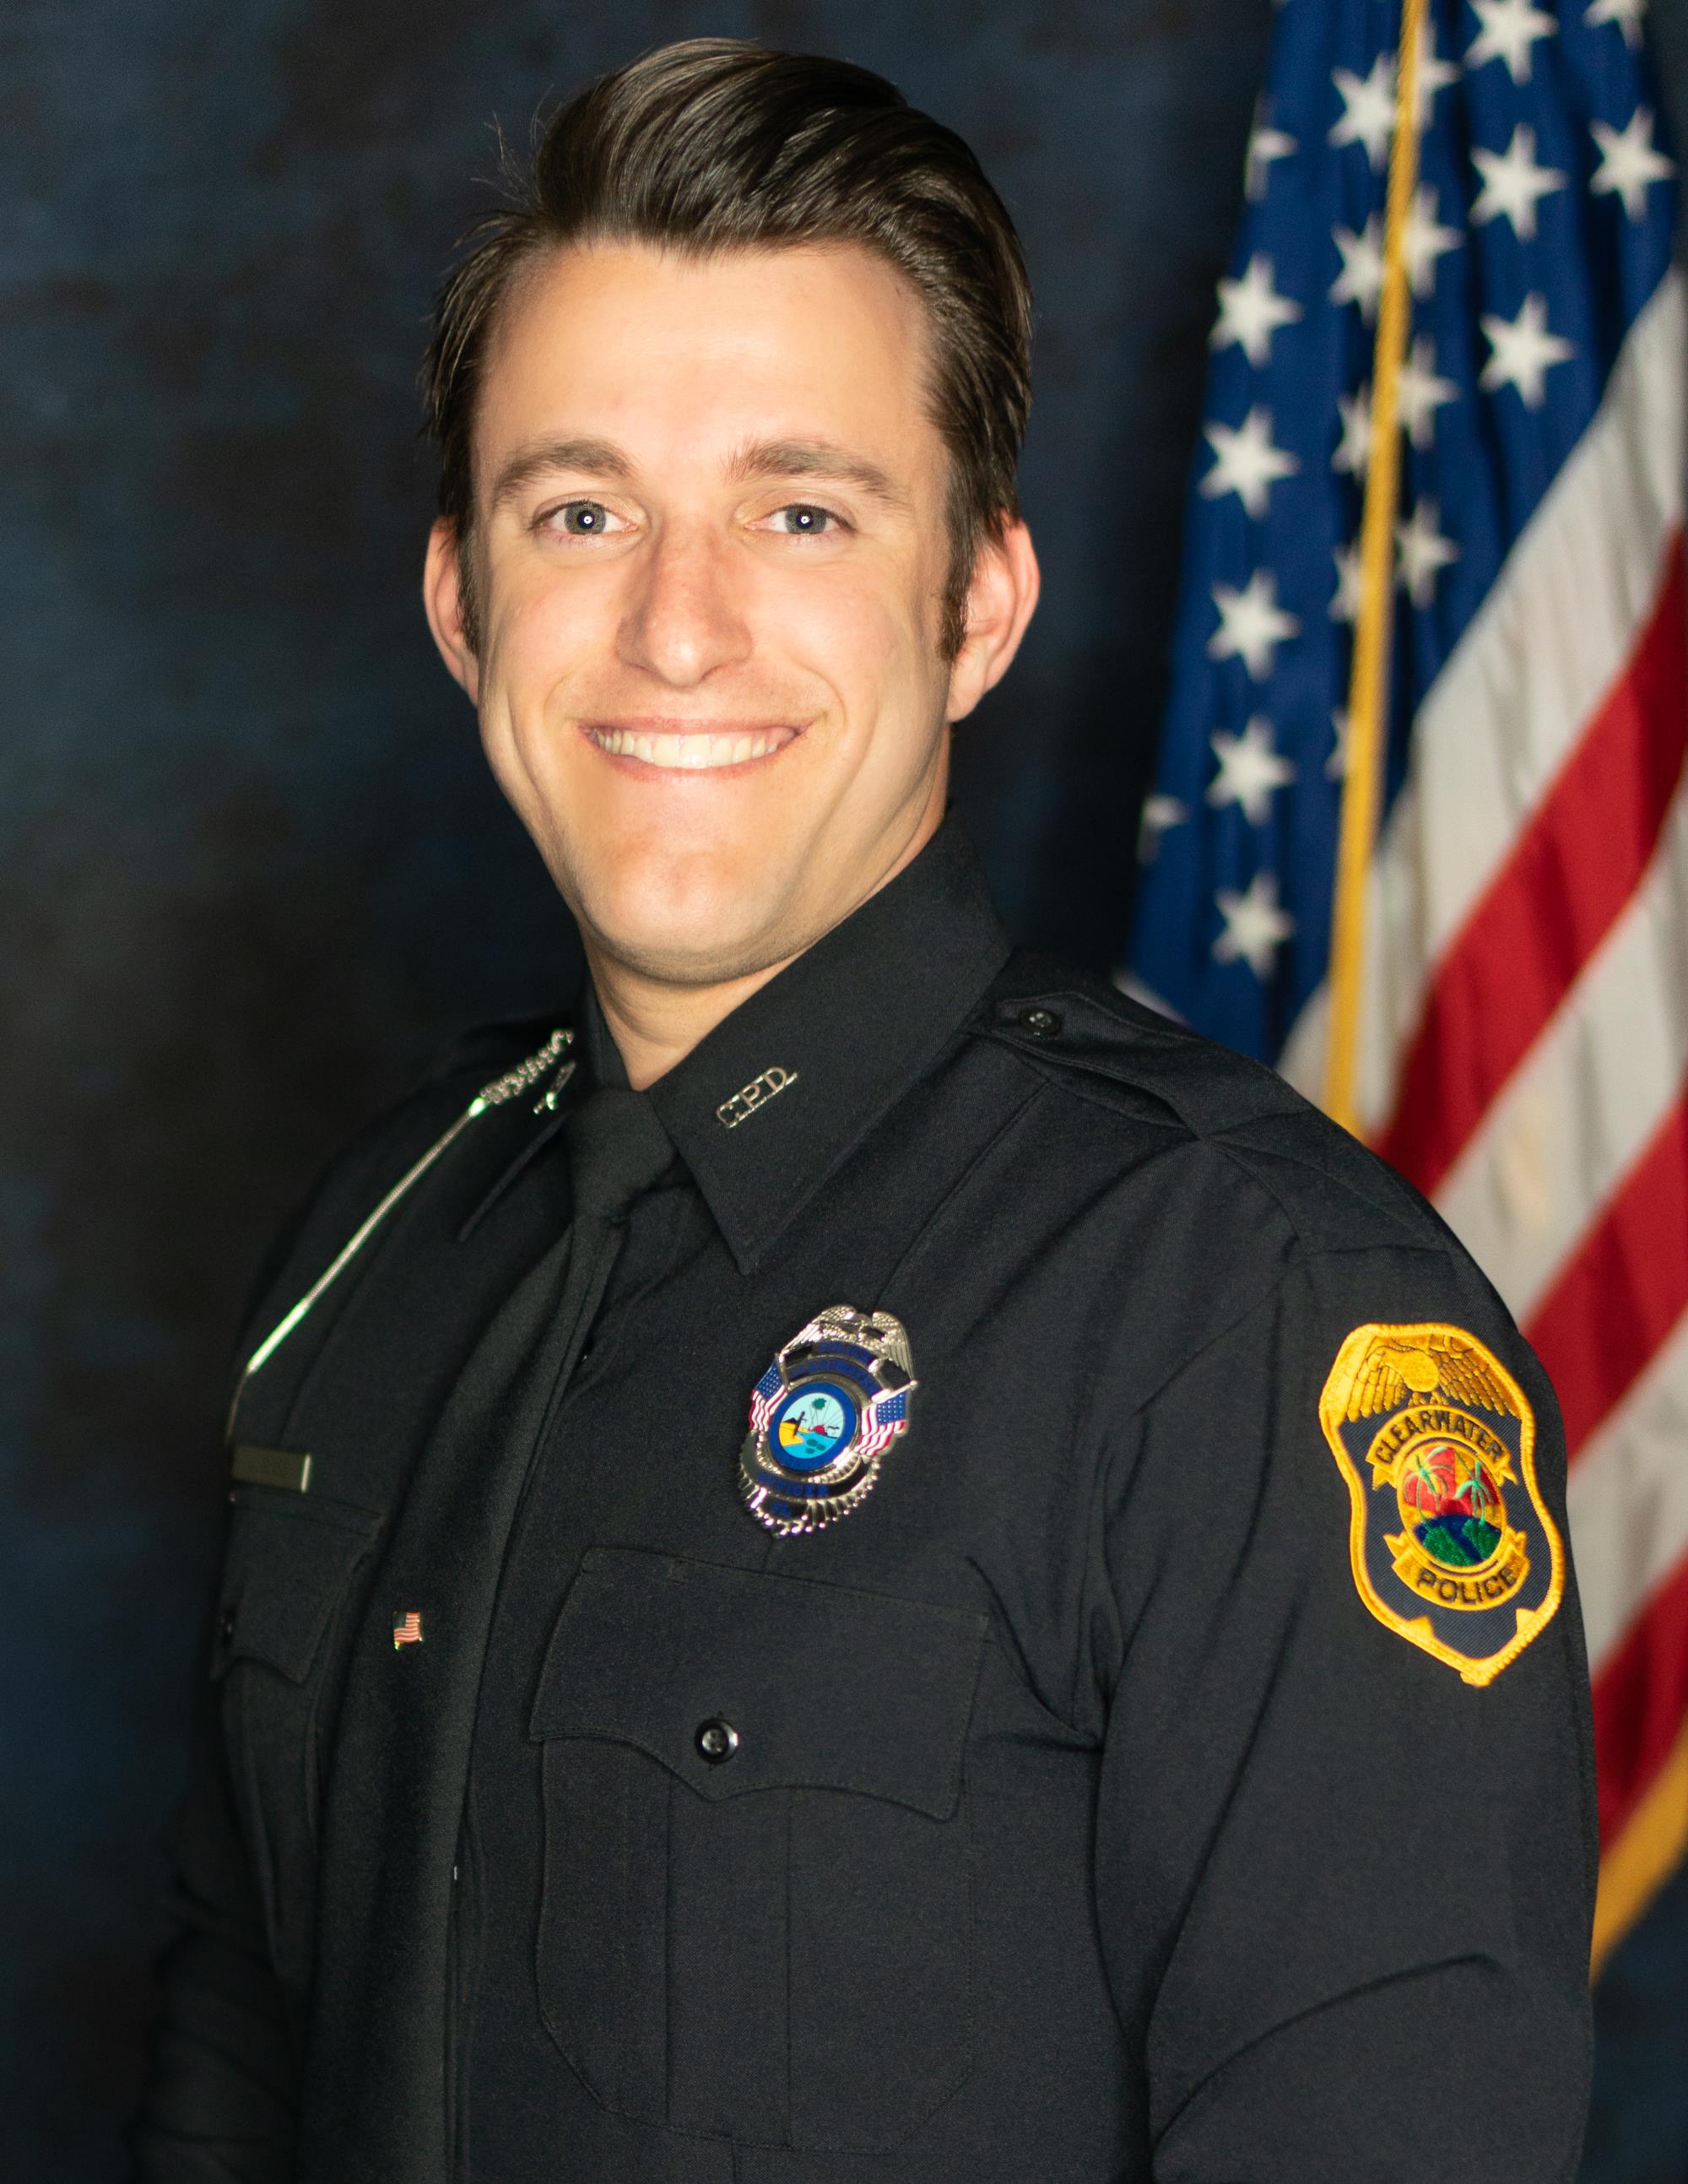 Officer Brian Hoxie